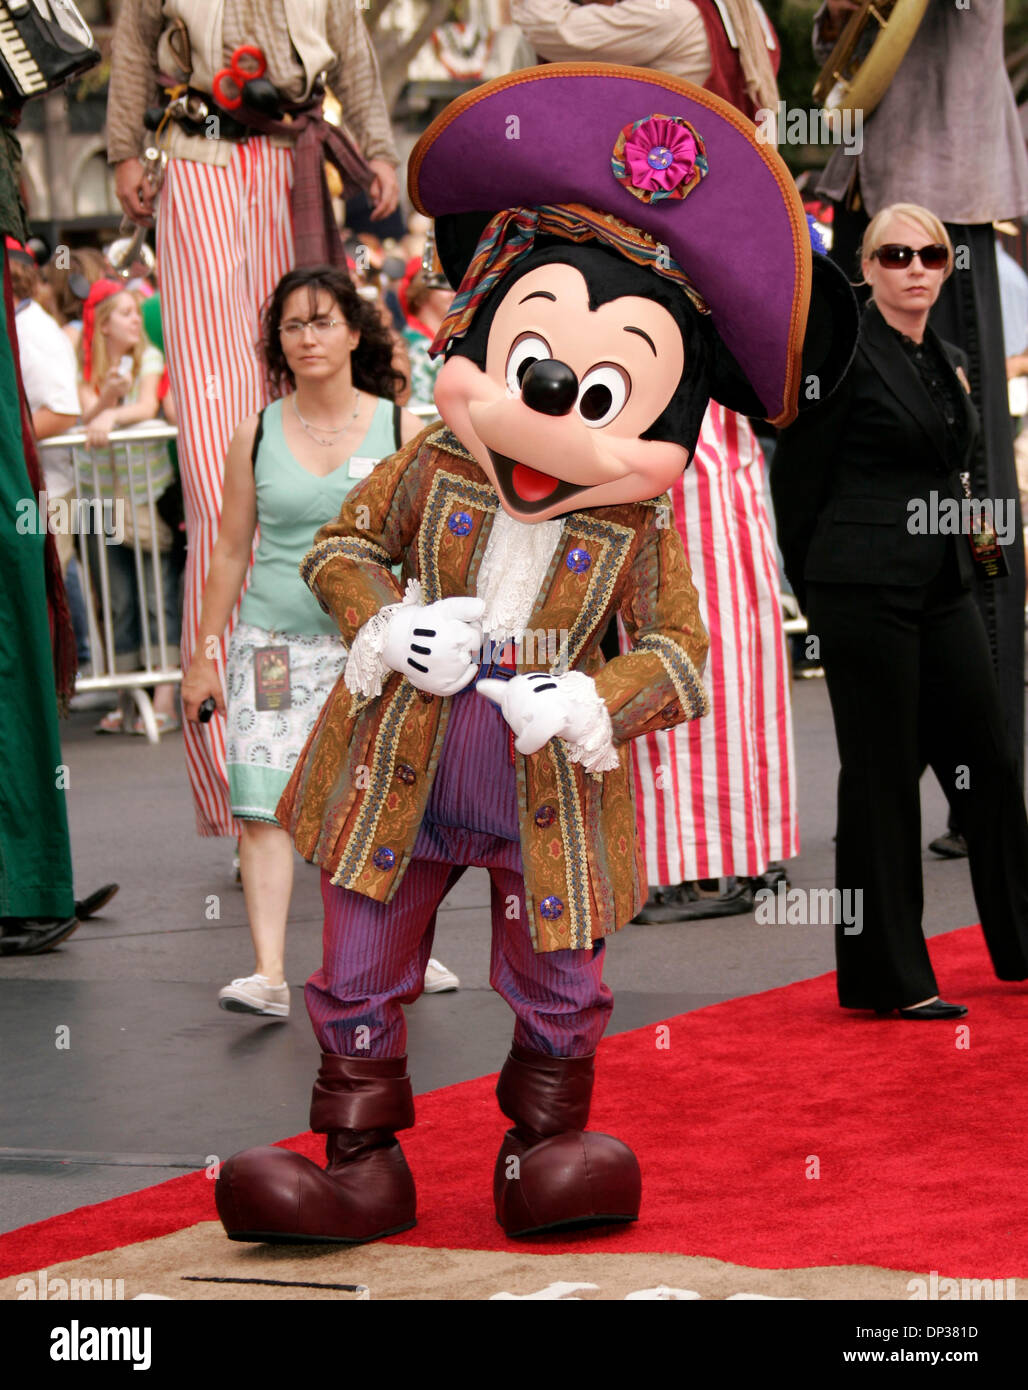 Jun 24, 2006; Anaheim, California, USA; Host MICKEY MOUSE at the 'Pirates Of The Caribbean: Dead Man's Chest' World Premiere held at Disneyland. Mandatory Credit: Photo by Lisa O'Connor/ZUMA Press. (©) Copyright 2006 by Lisa O'Connor Stock Photo